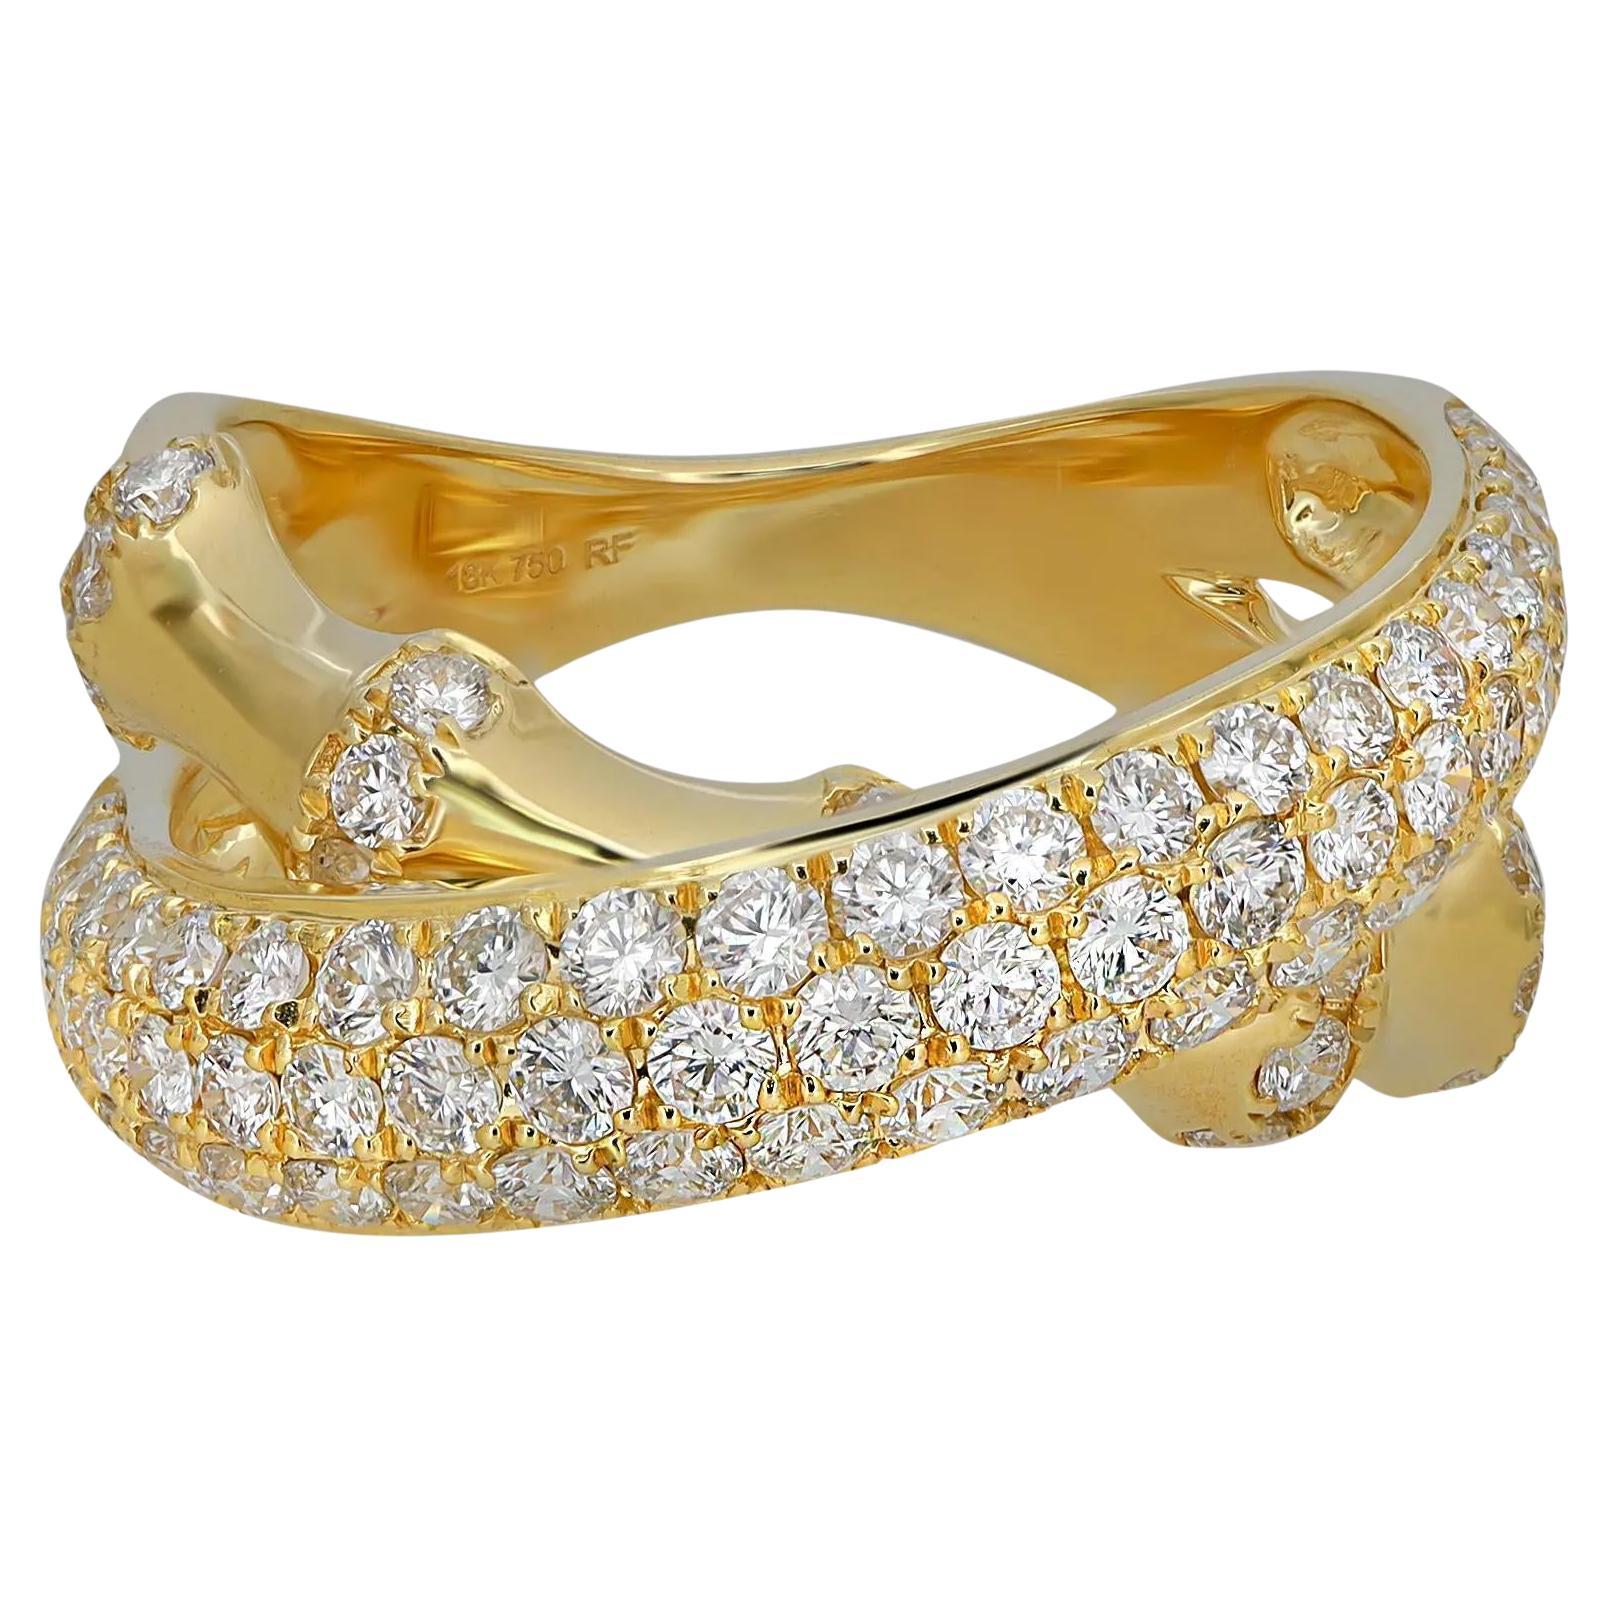 Pave Set Round Cut Diamond Crossover Band Ring 18K Yellow Gold 1.71Ctw Size 6.5 For Sale